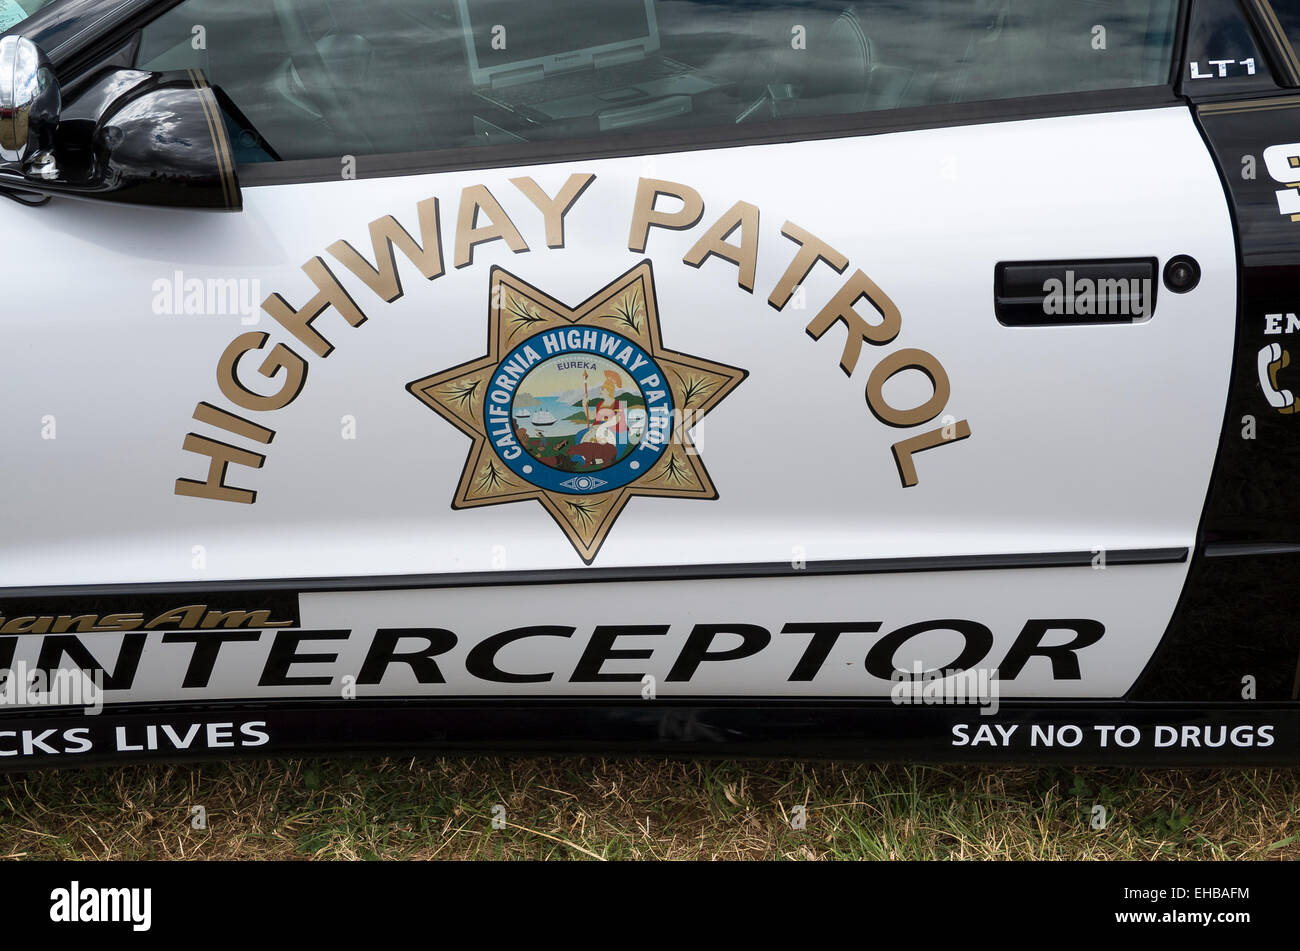 HIGHWAY PATROL car retired from Caliofornia and now a collector's car Stock Photo